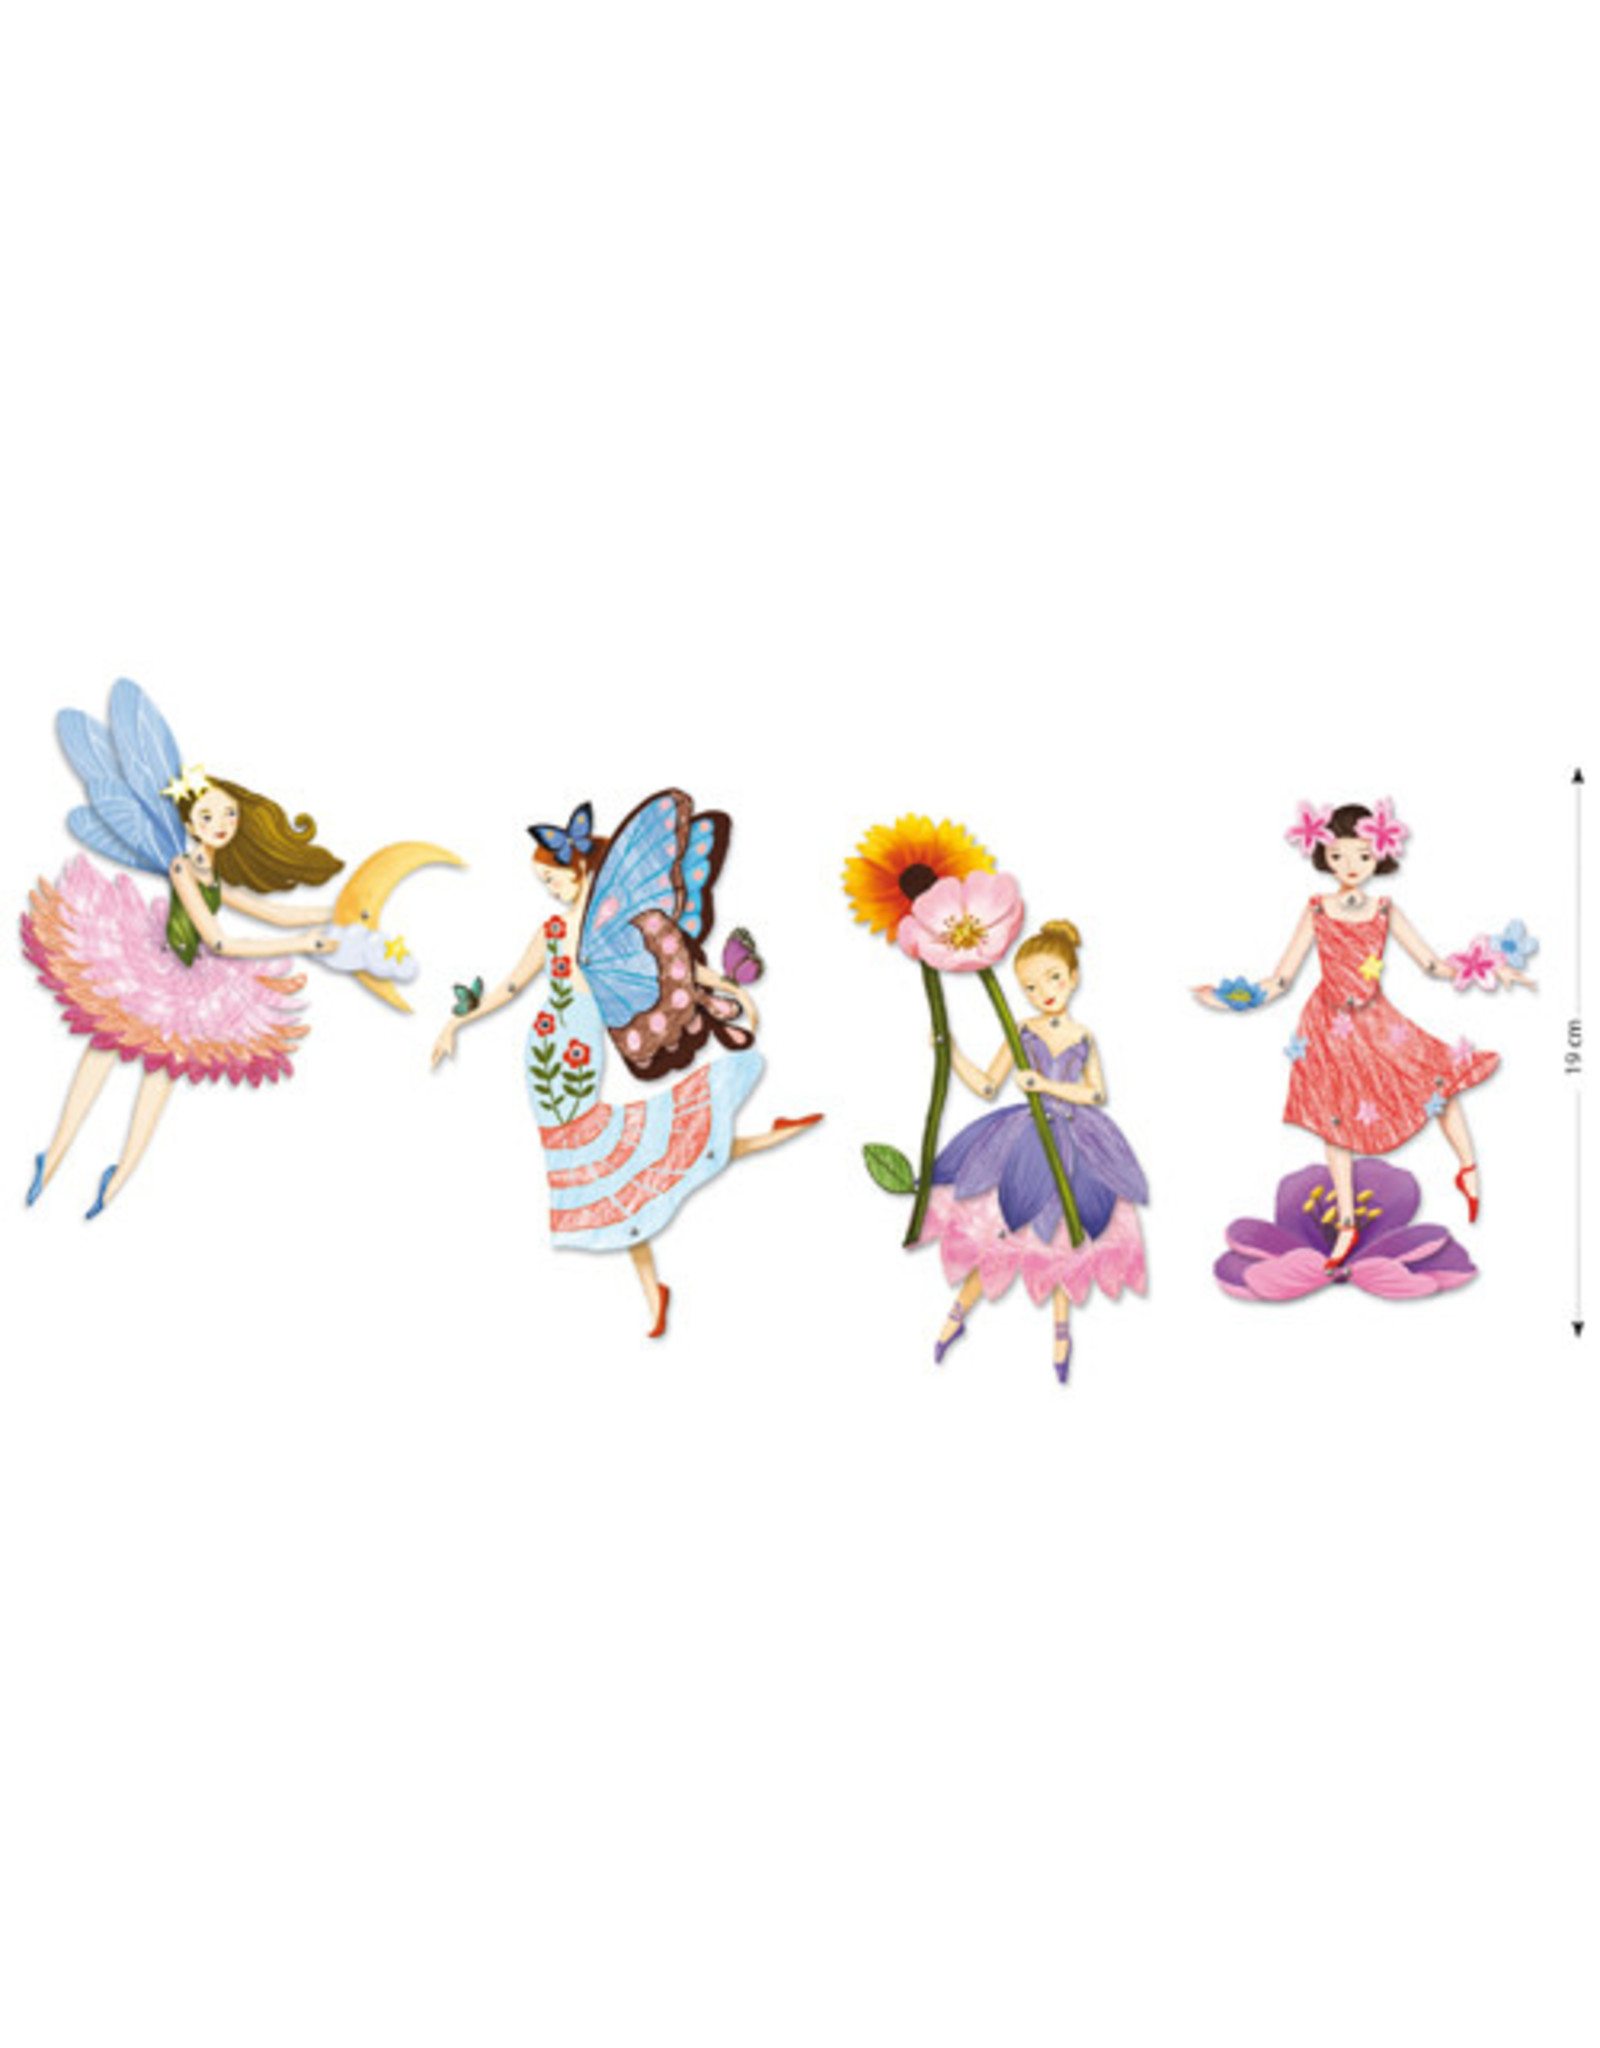 Djeco Fairies Jumping Jacks Paper Puppets